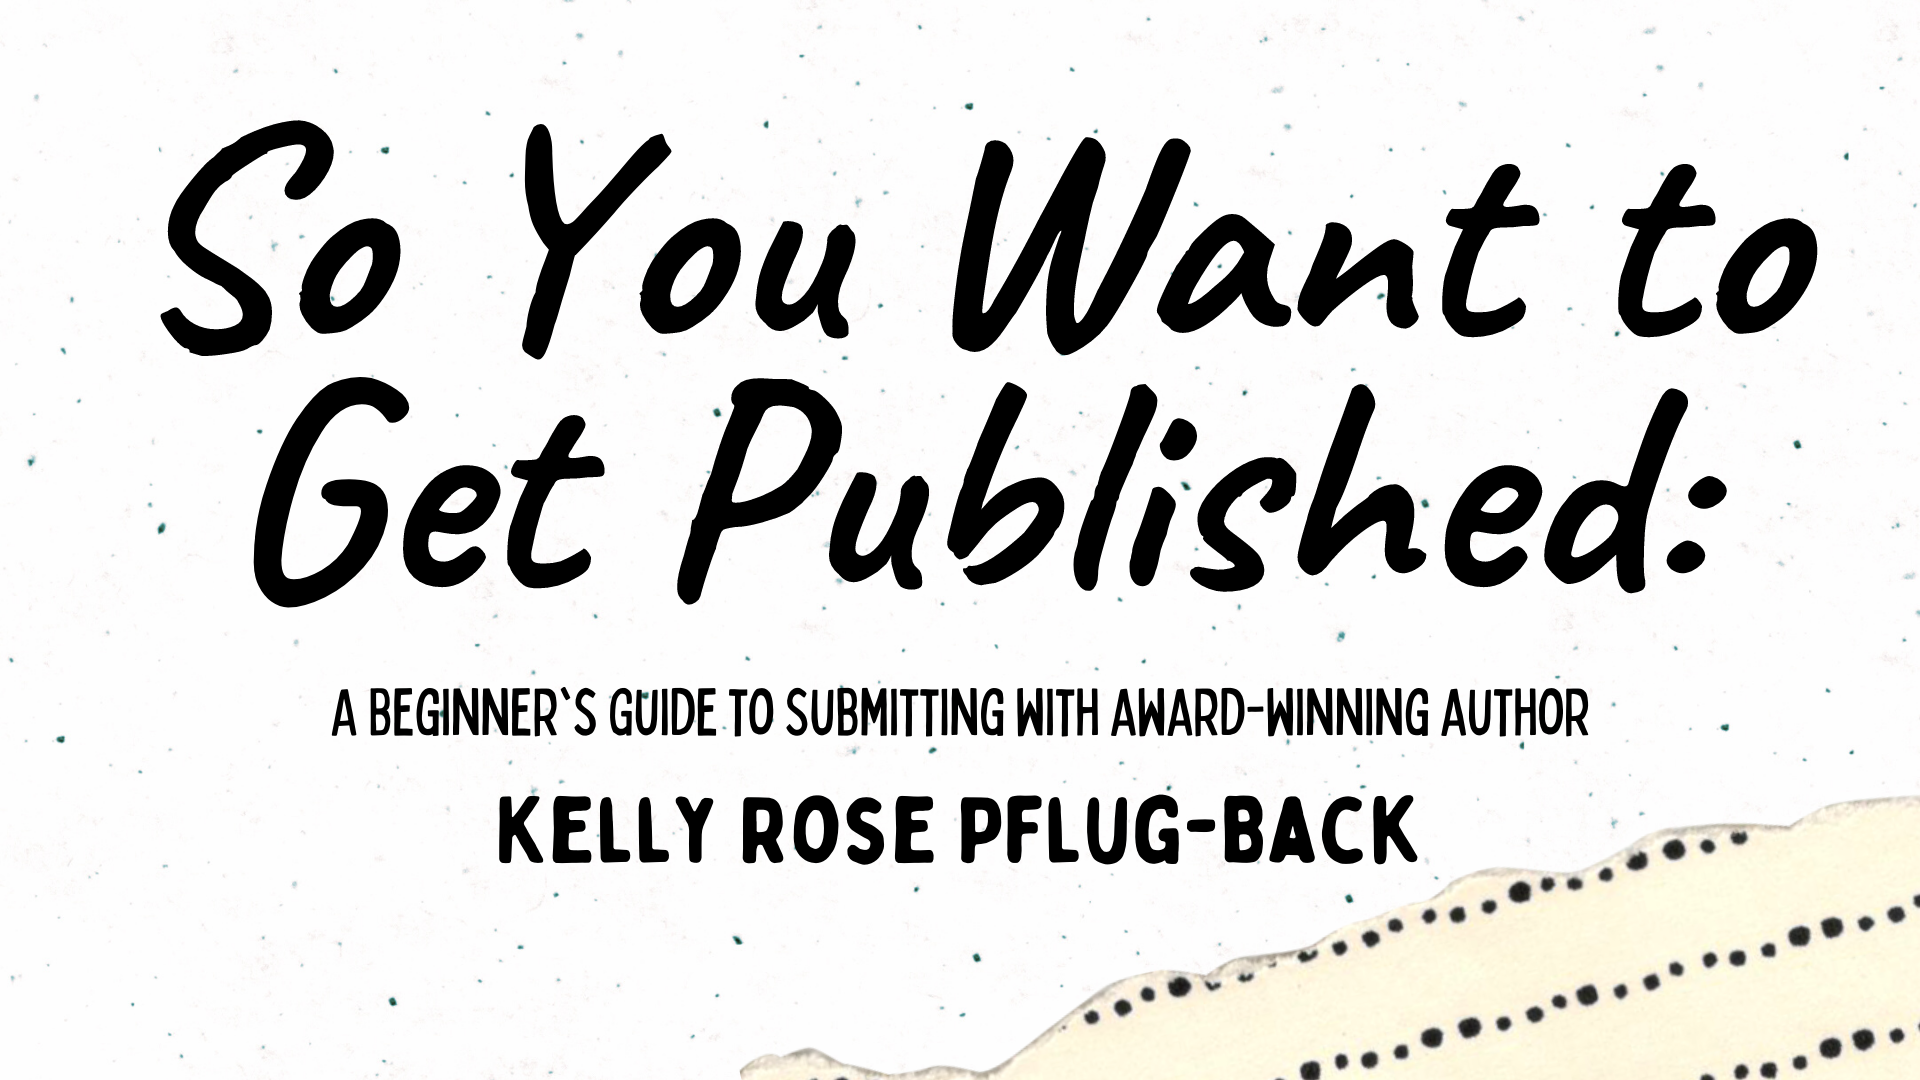 So You Want To Get Published: A Beginner's Guide to Submitting Creative Writing 